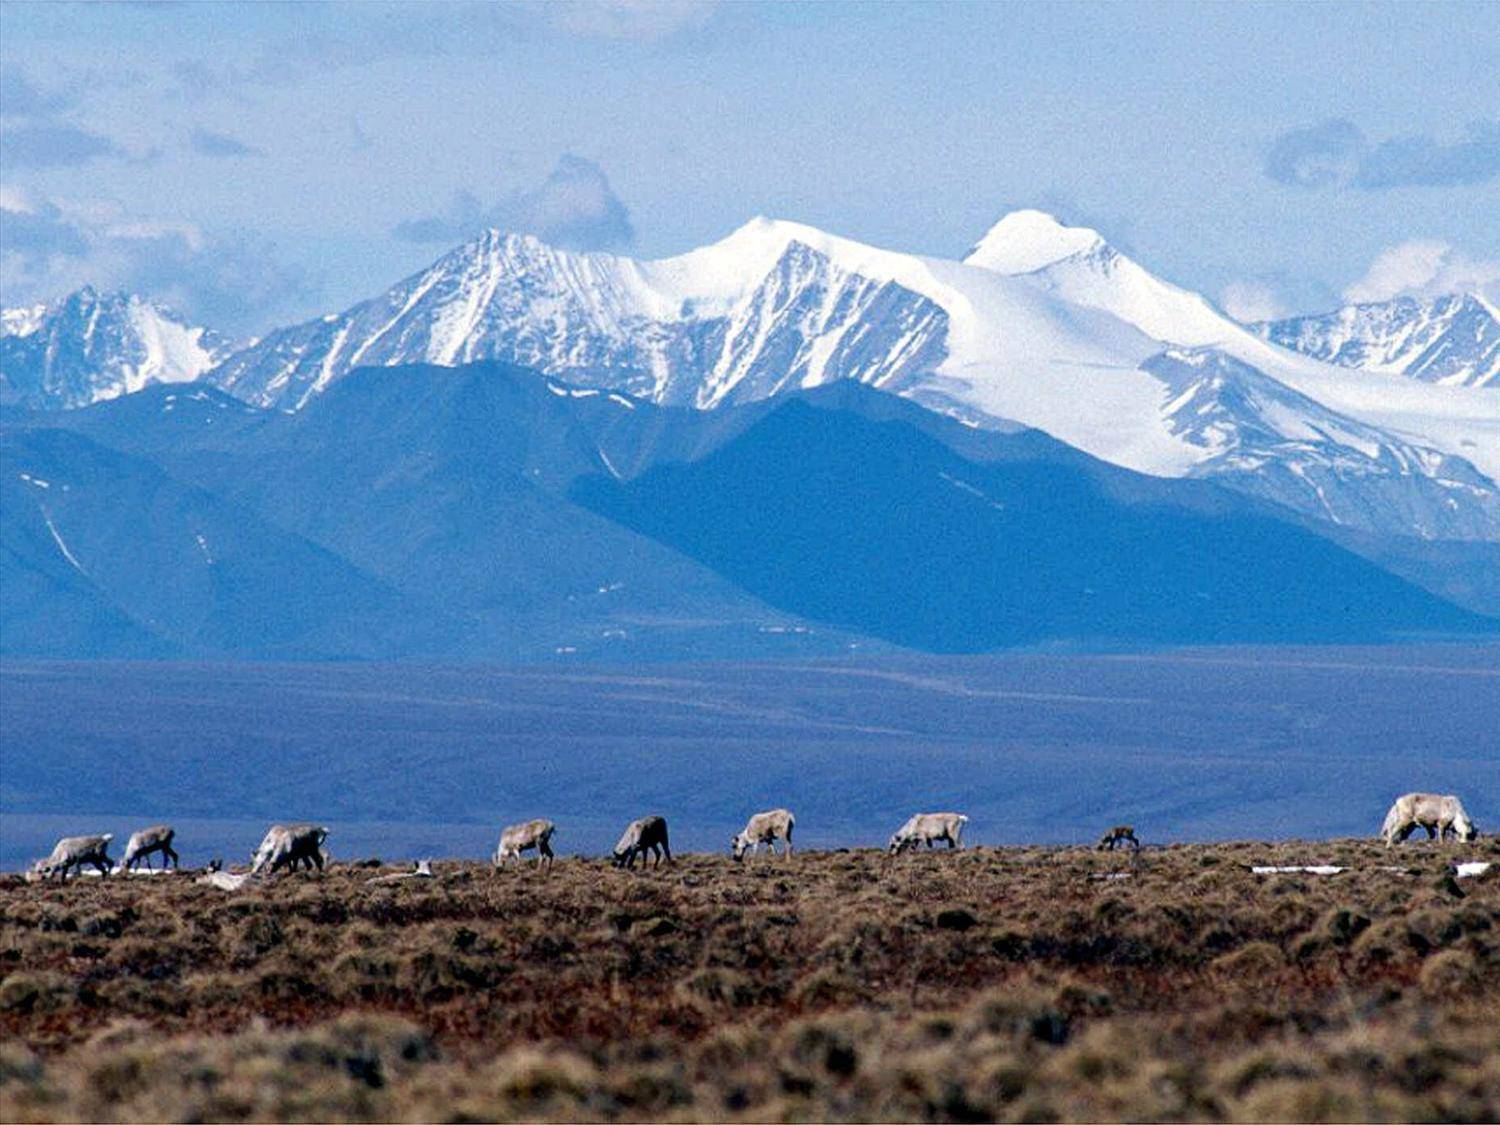 In this June 1, 2001 file photo Caribou graze in the Arctic National Wildlife Refuge in Alaska. U.S. District Judge Sharon Gleason, on Wednesday, Aug. 18, 2021, has thrown out the Trump administration’s approval for a massive oil project on Alaska’s North Slope, saying the federal review was flawed and didn’t include mitigation measures for polar bears. (AP Photo/File)